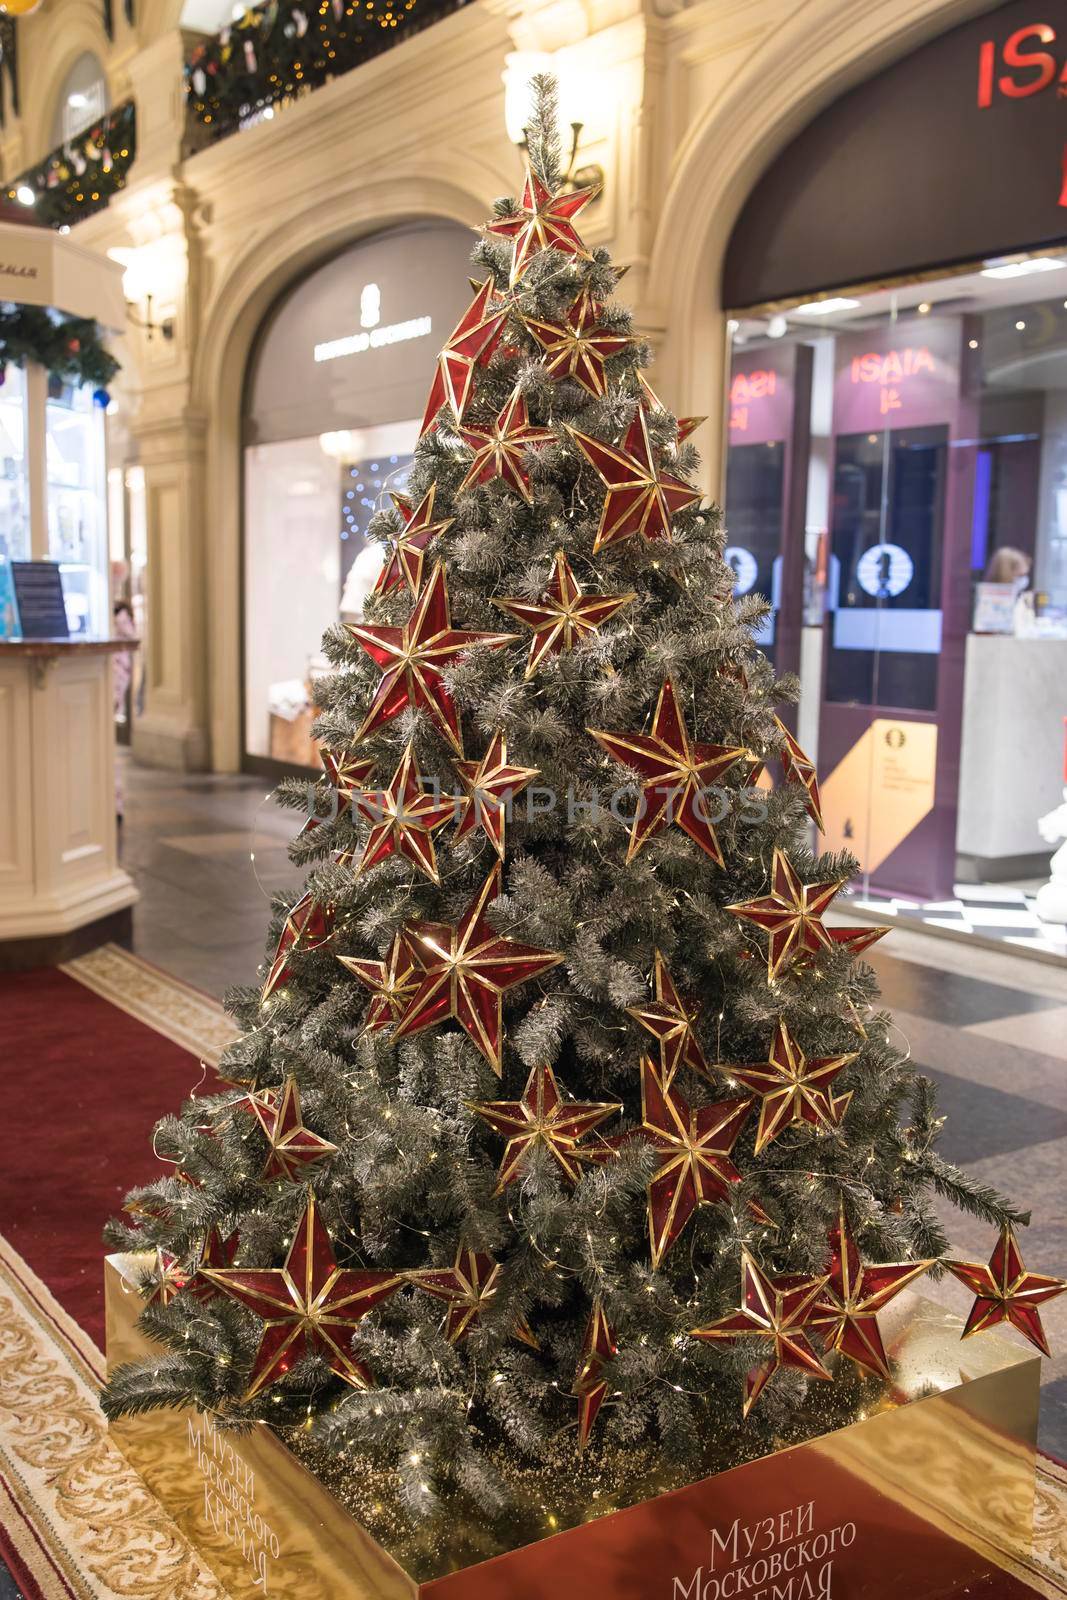 Moscow, Russia - 10 December 2021, Christmas trees decorated in various styles at the GUM department store